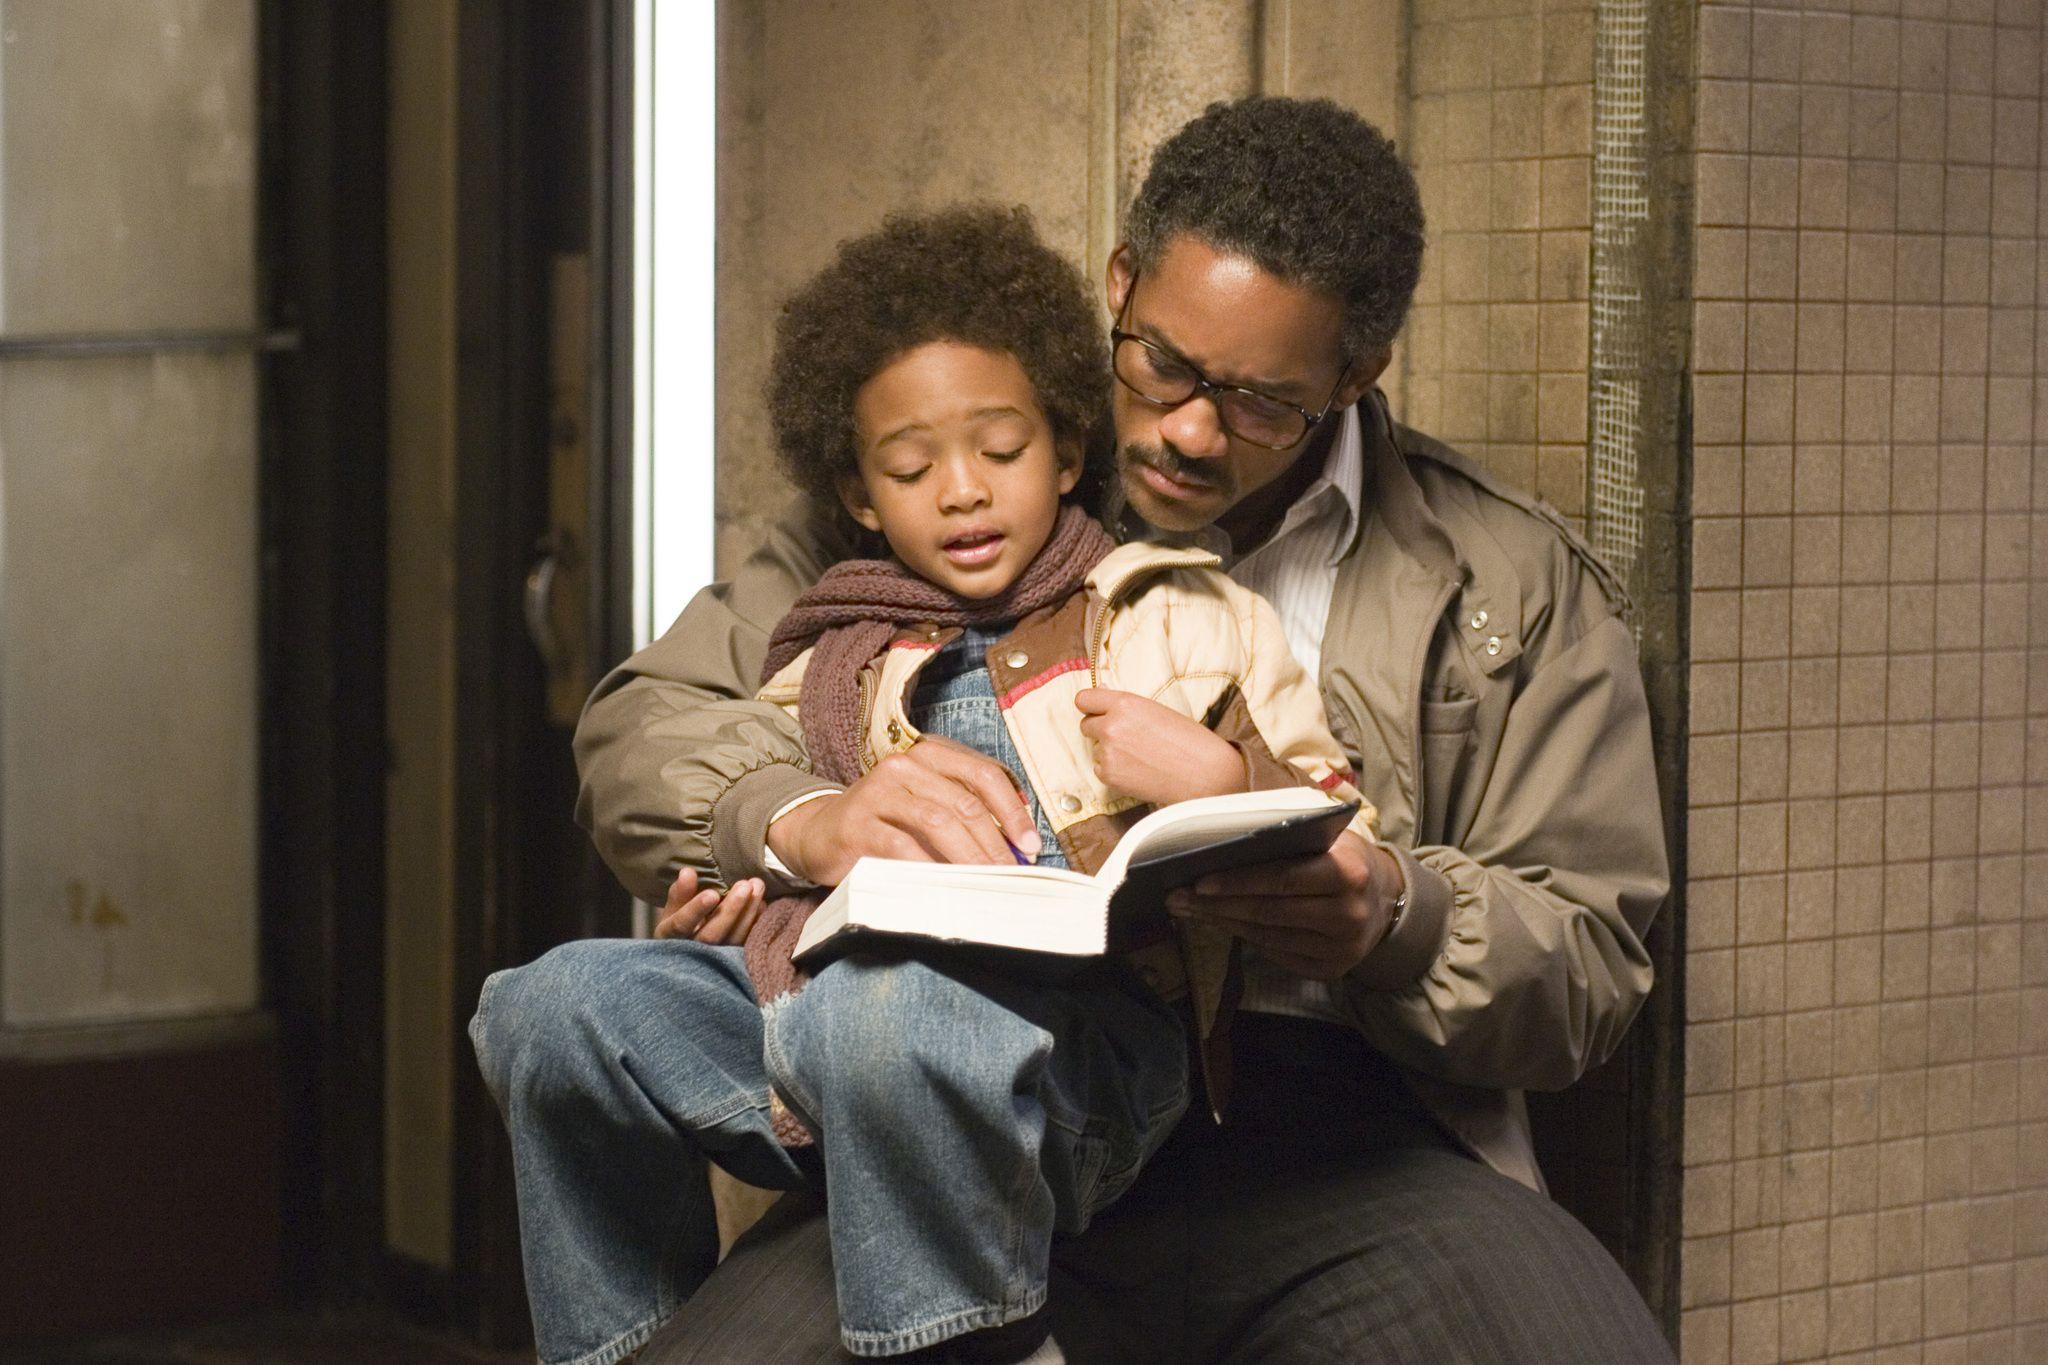 pursuit of happyness full movie hd download free